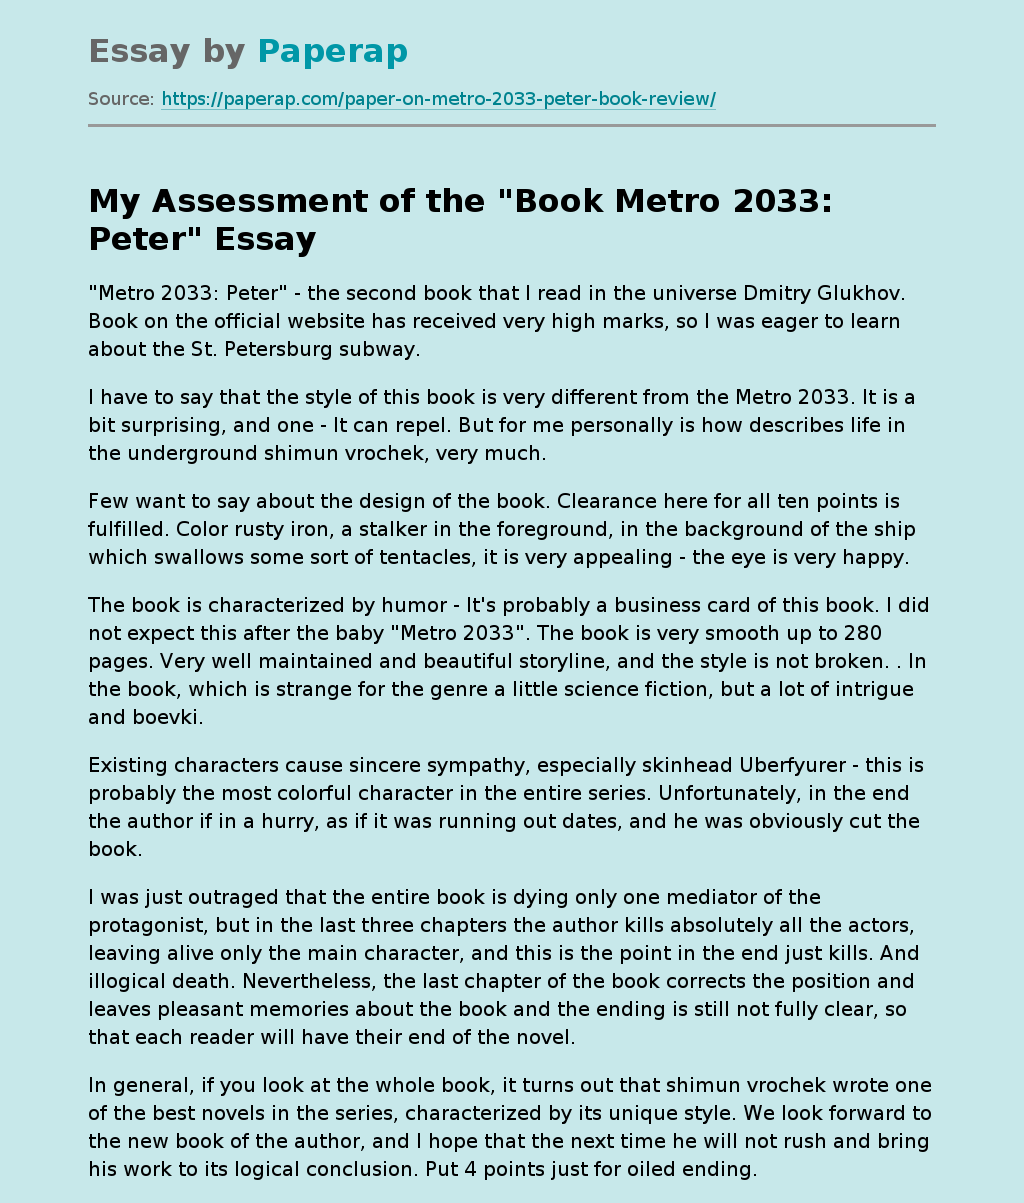 My Assessment of the "Book Metro 2033: Peter"